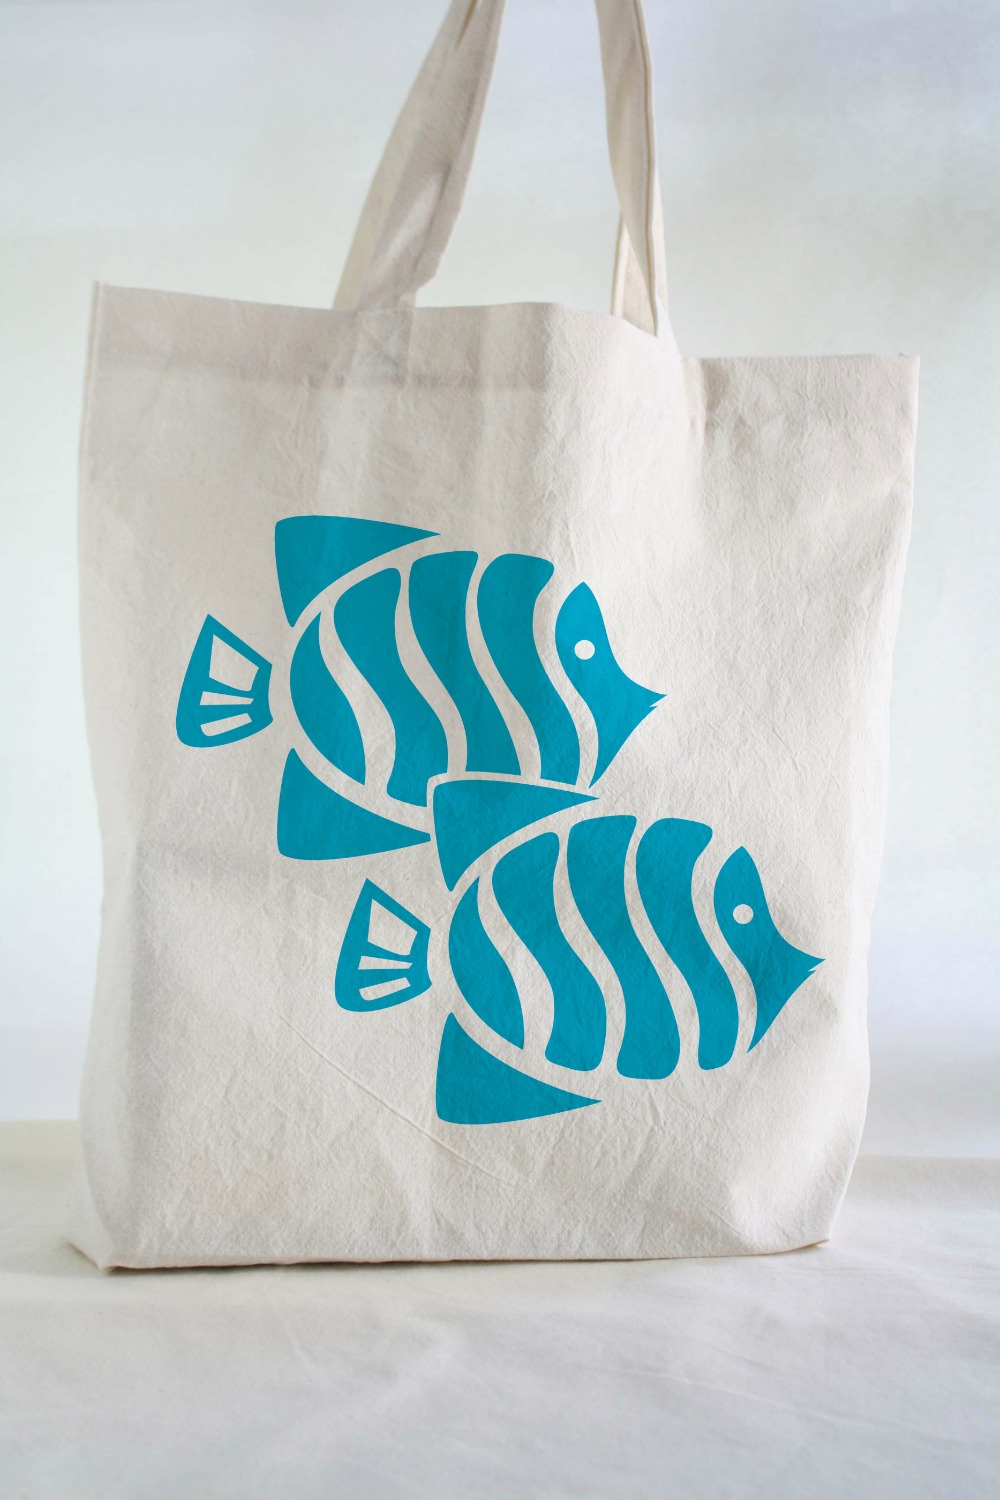 Cotton TOTE BAG - Beach Tote - Cotton Tote Bag With Hand Printed ...